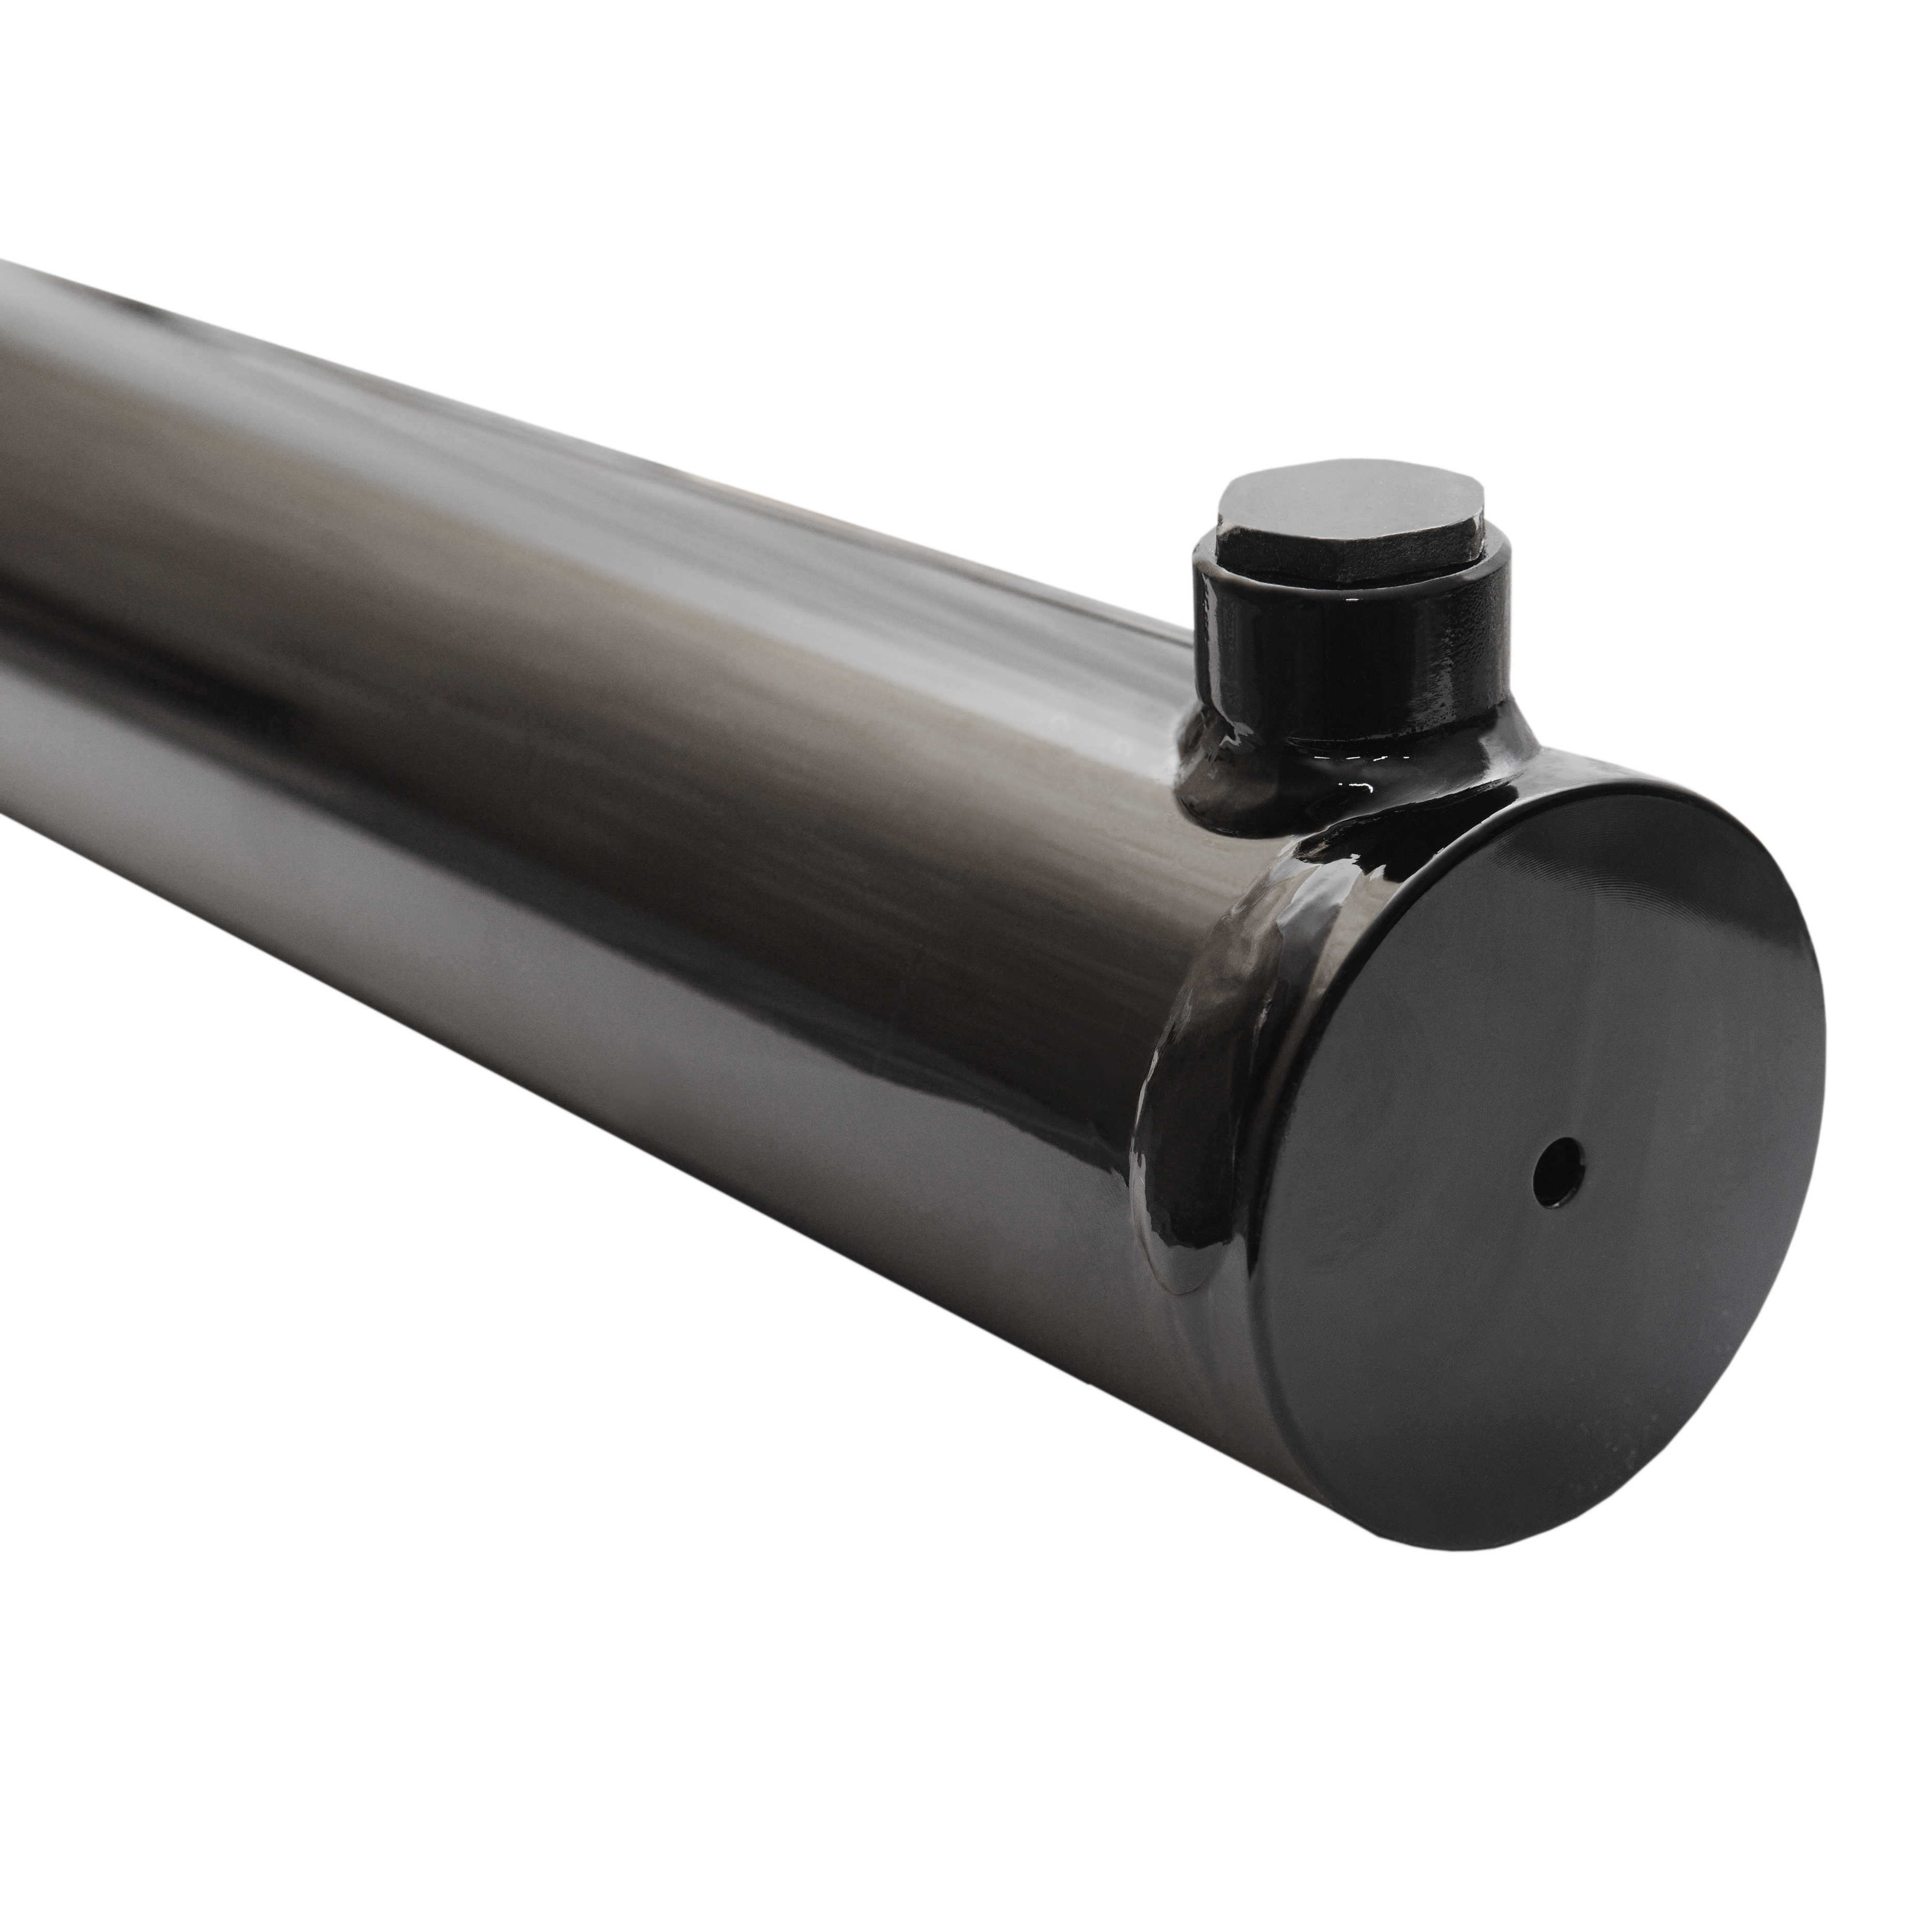 2.5 bore x 8 stroke hydraulic cylinder, welded universal double acting cylinder | Magister Hydraulics